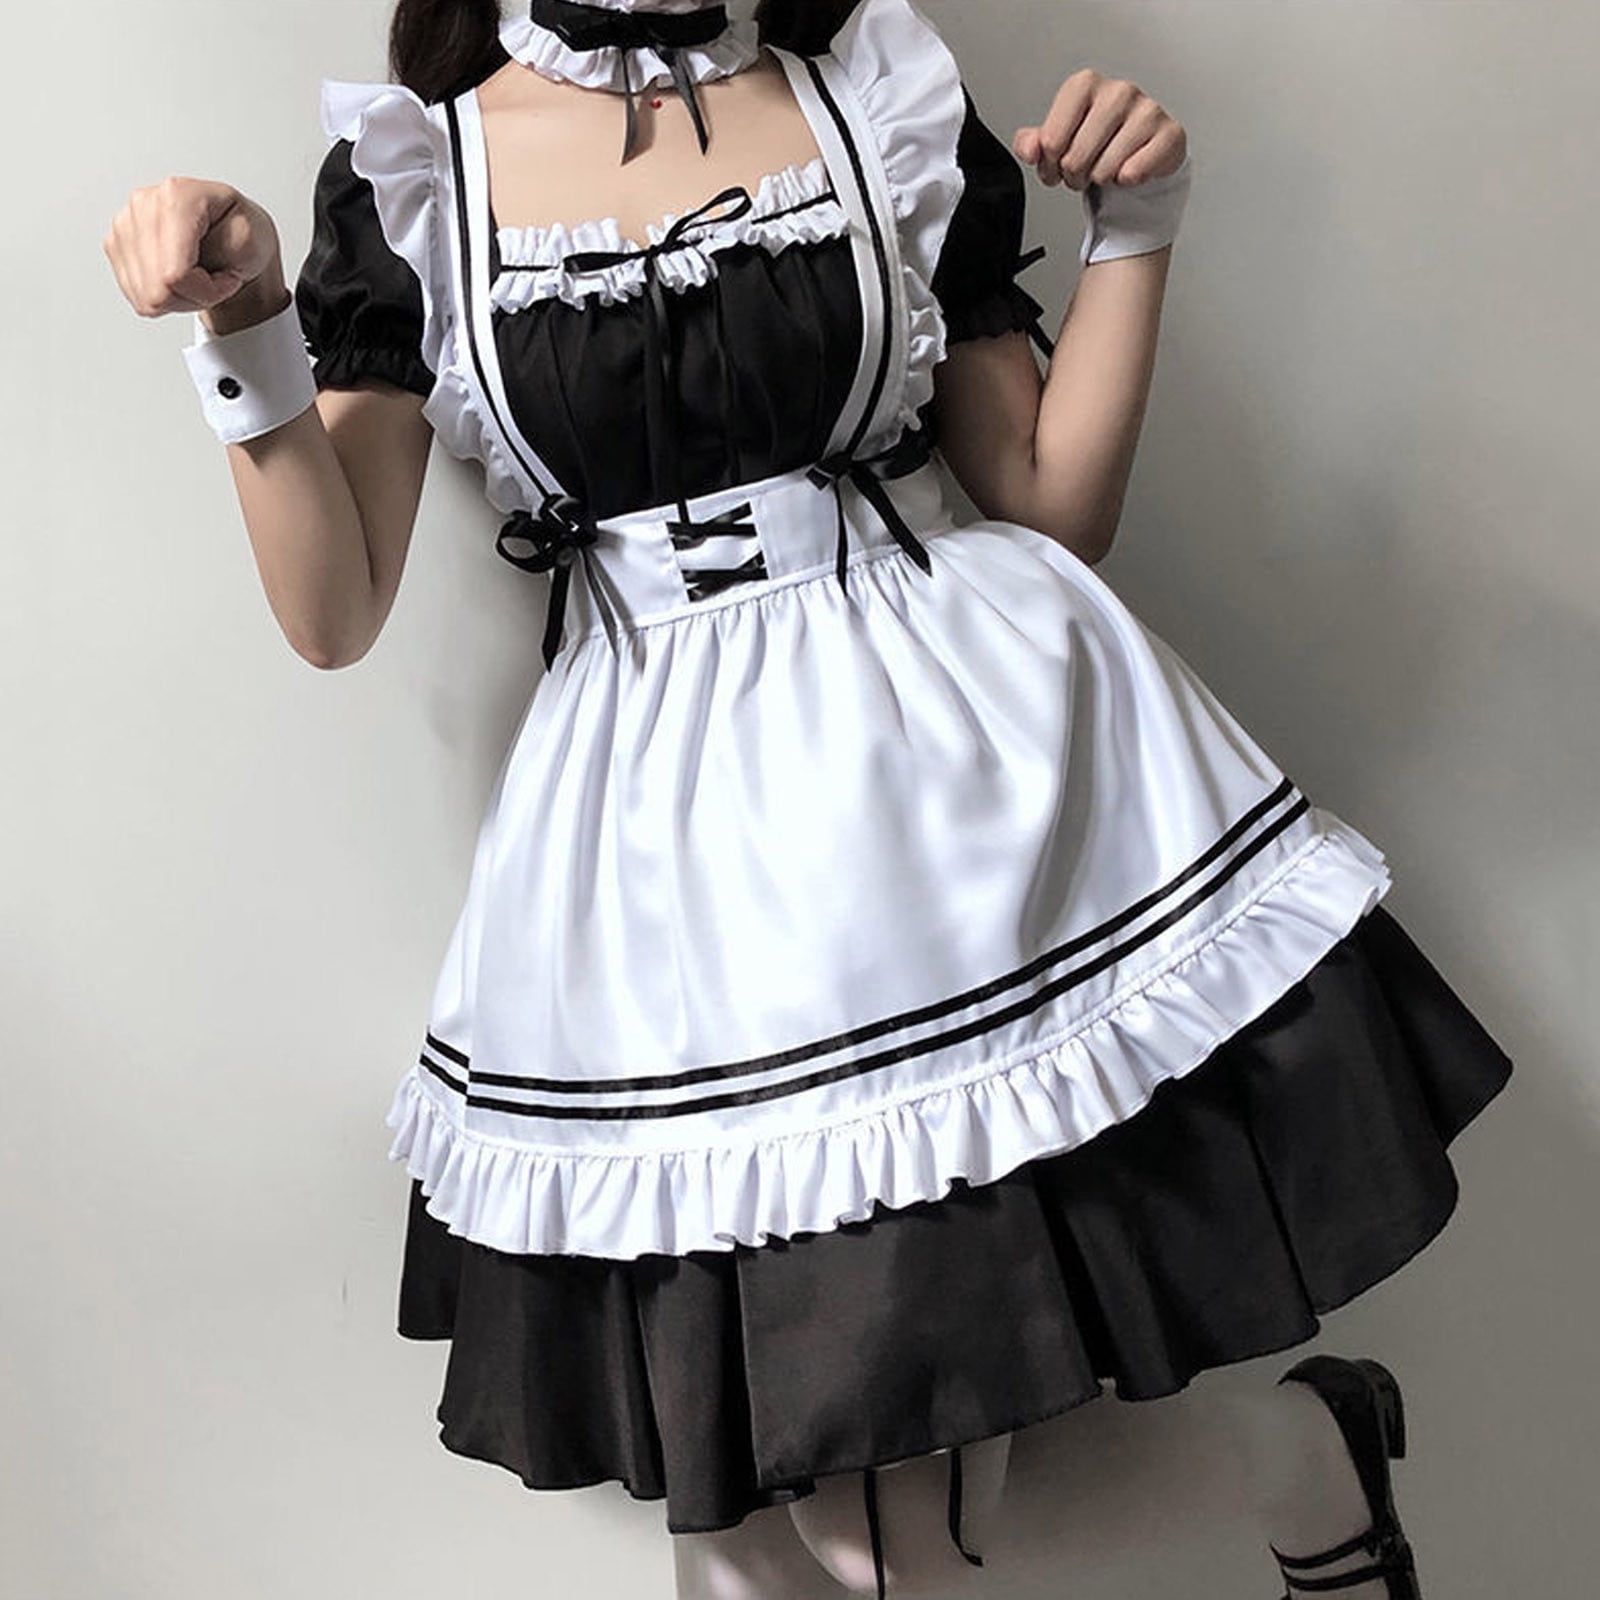 Medieval Dresses For Women  Anime Cosplay Costumes For Women Halloween  Maid Dress Outfits Sweet Classic Apron Dresses Sets Masquerade Costume  Grunge Dress  Walmartcom